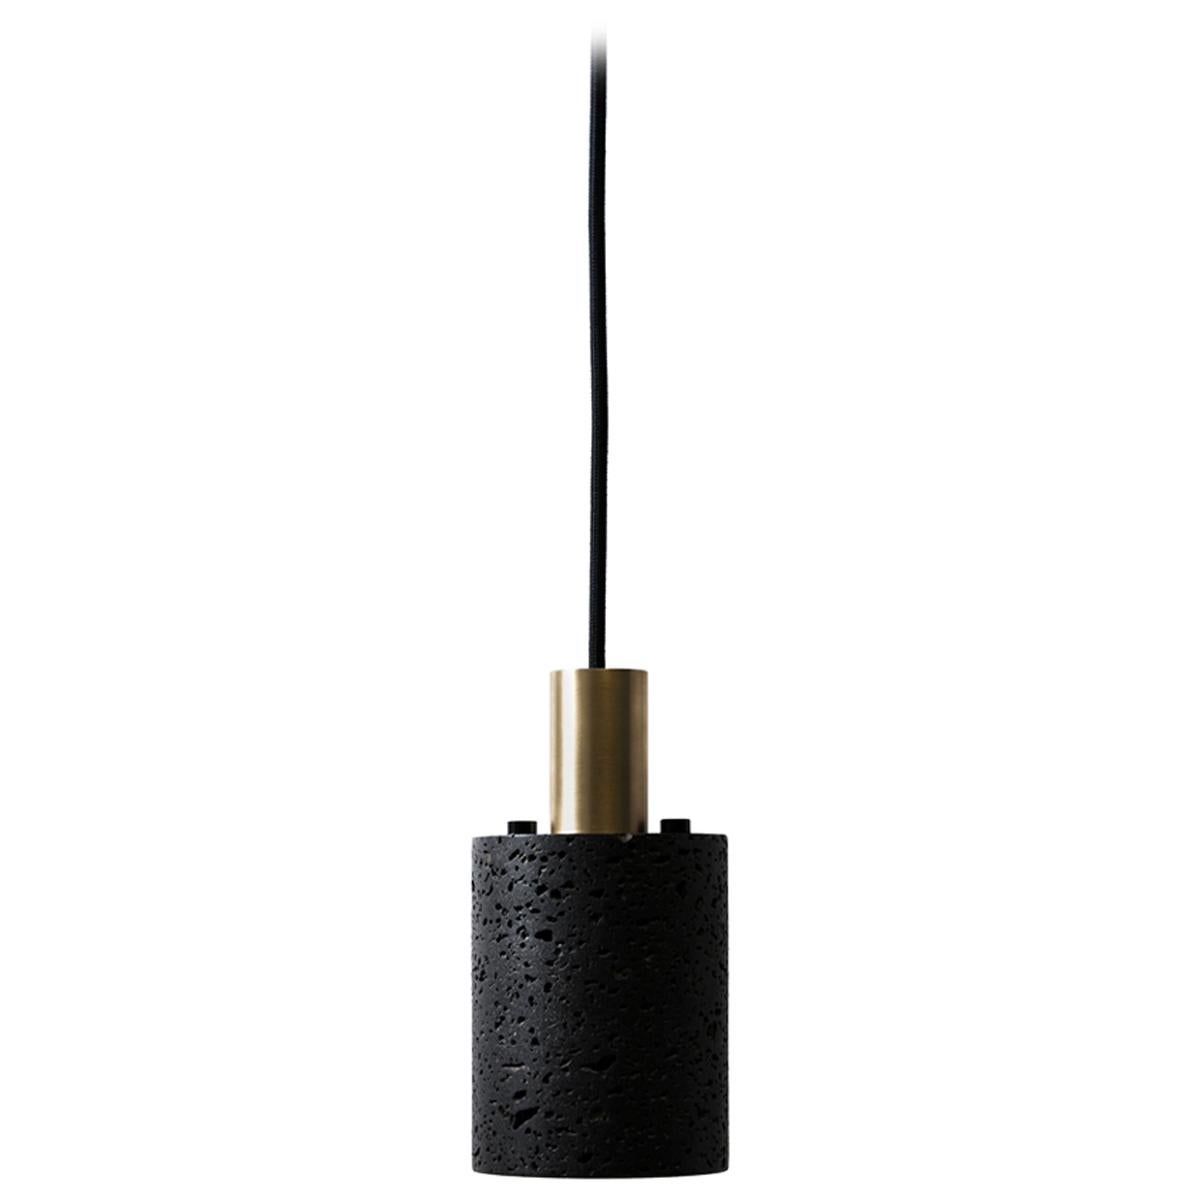 Lava Stone and Brass Pendant Light, “N, ” by Buzao